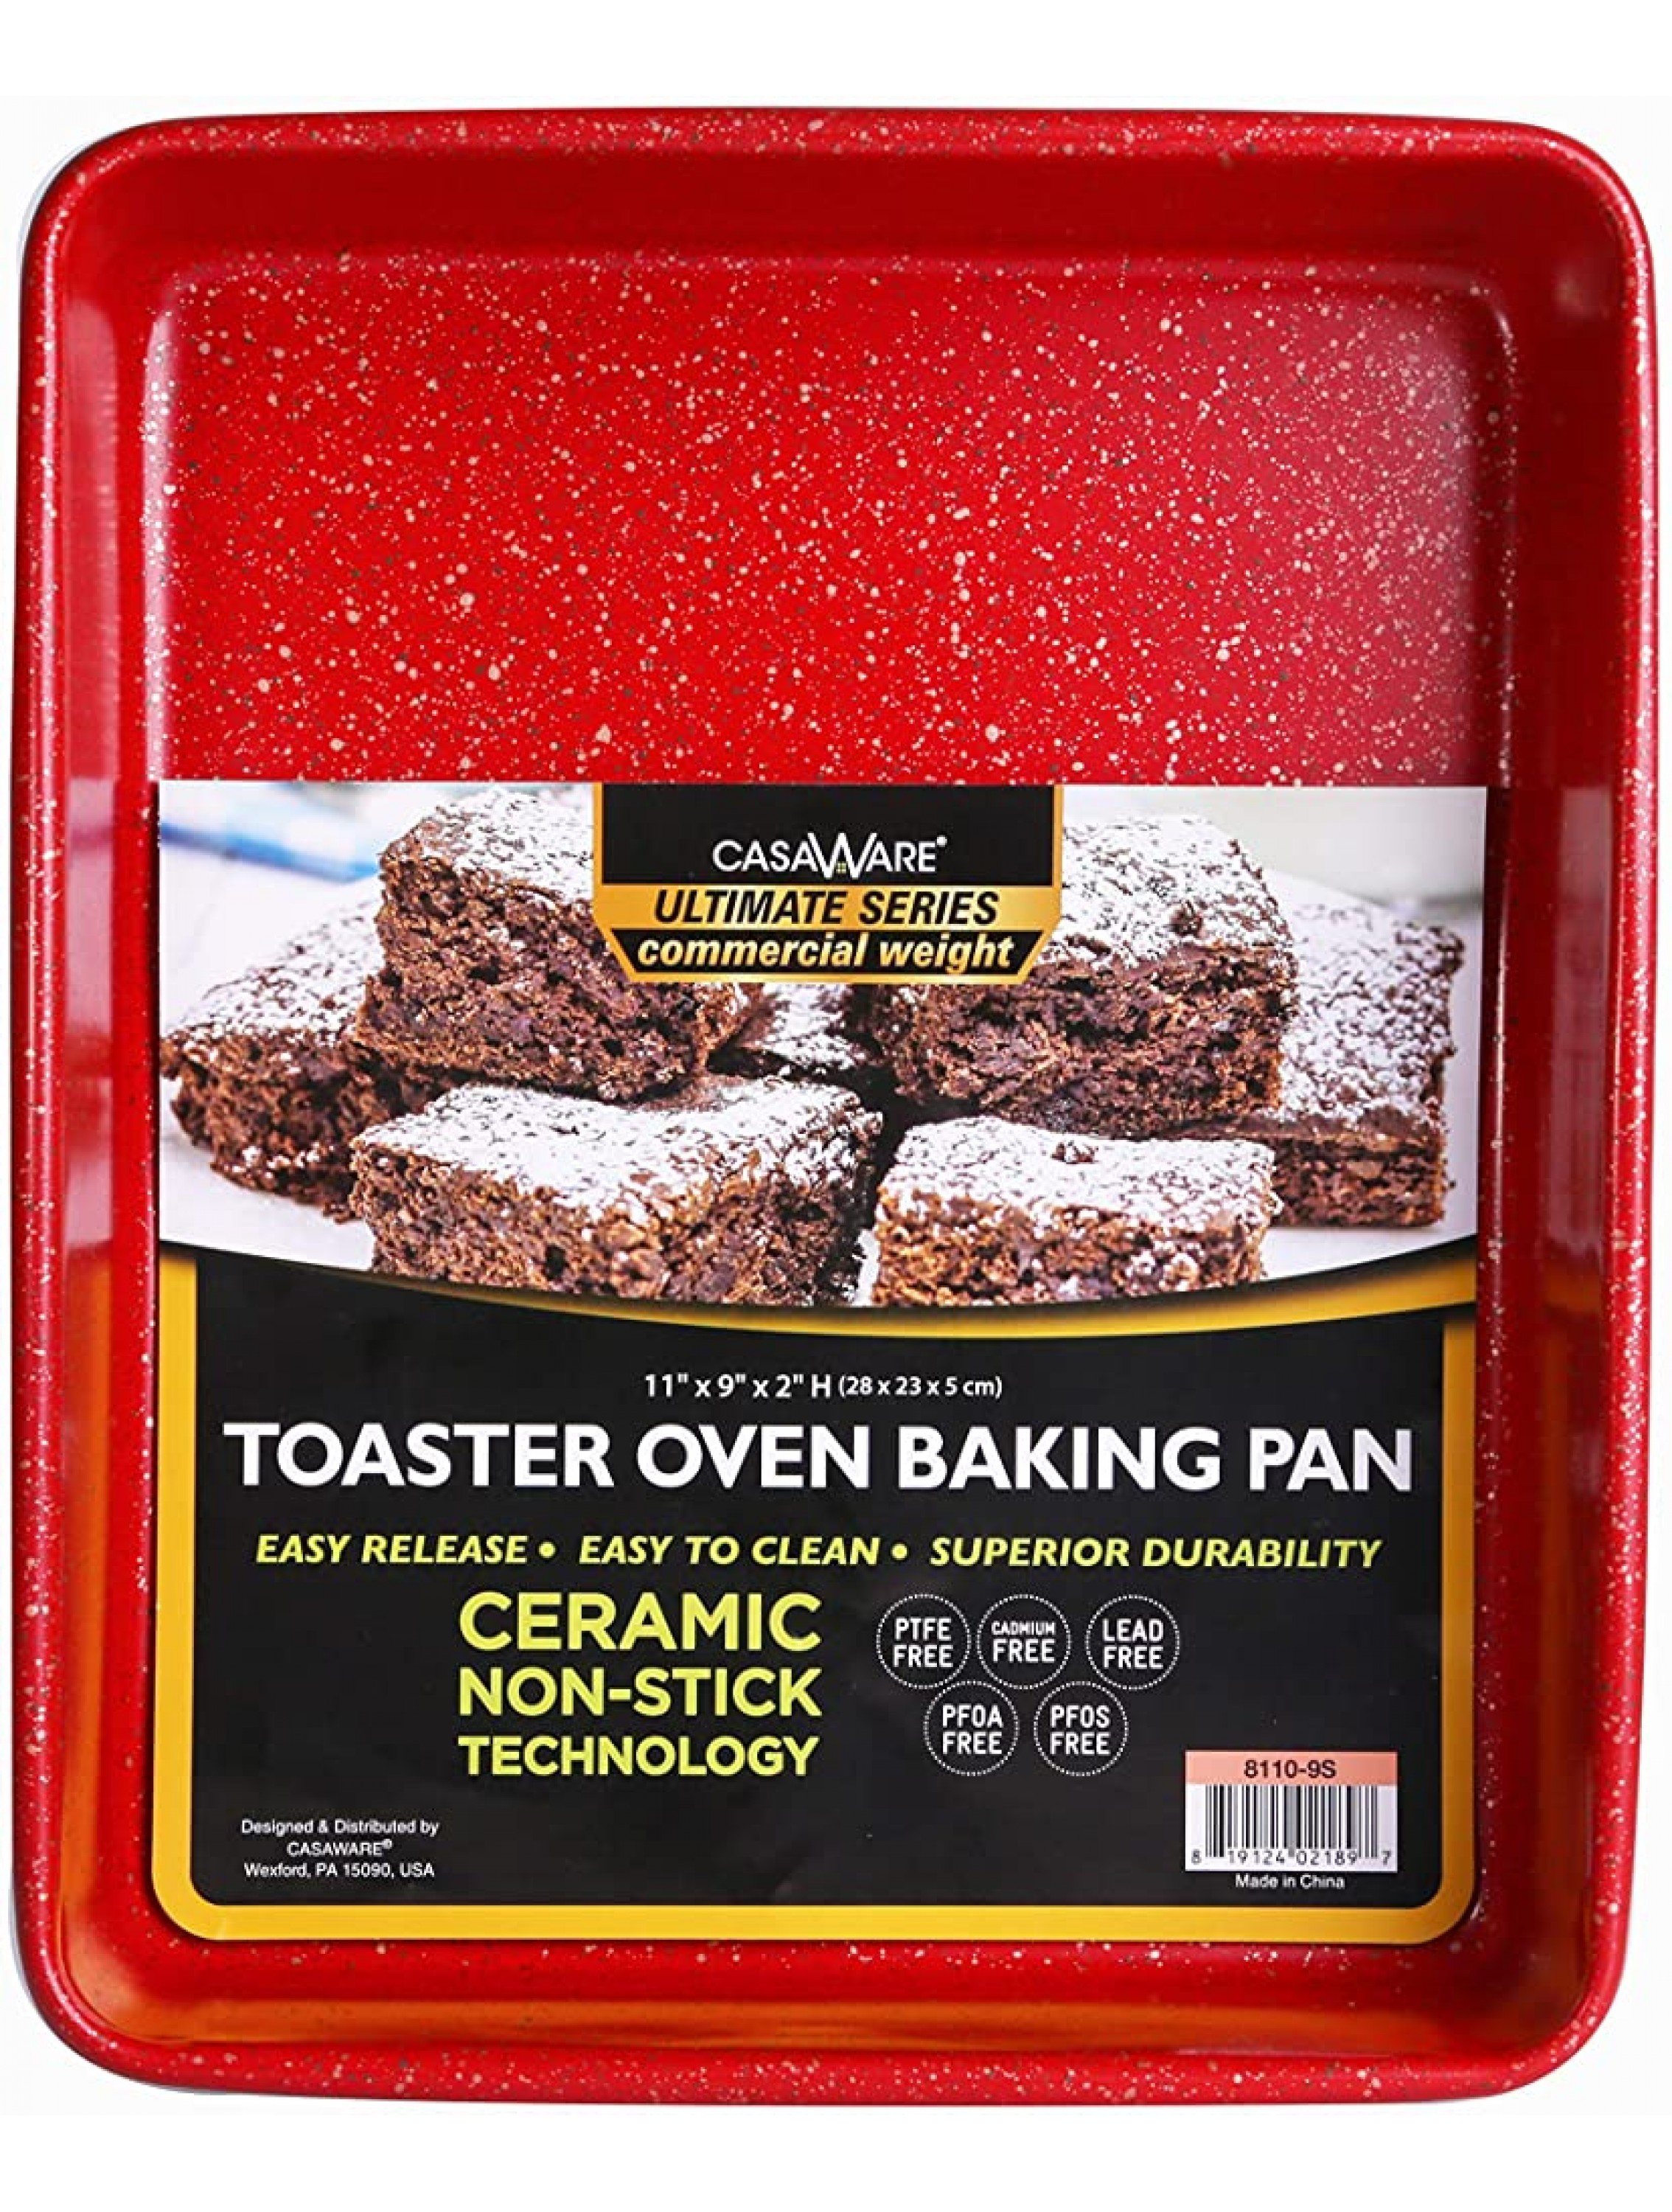 casaWare 11 x 9 x 2-inch Toaster Oven Ultimate Series Commercial Weight Ceramic Non-Stick Coating Baking Pan Red Granite - BEYW76LJL